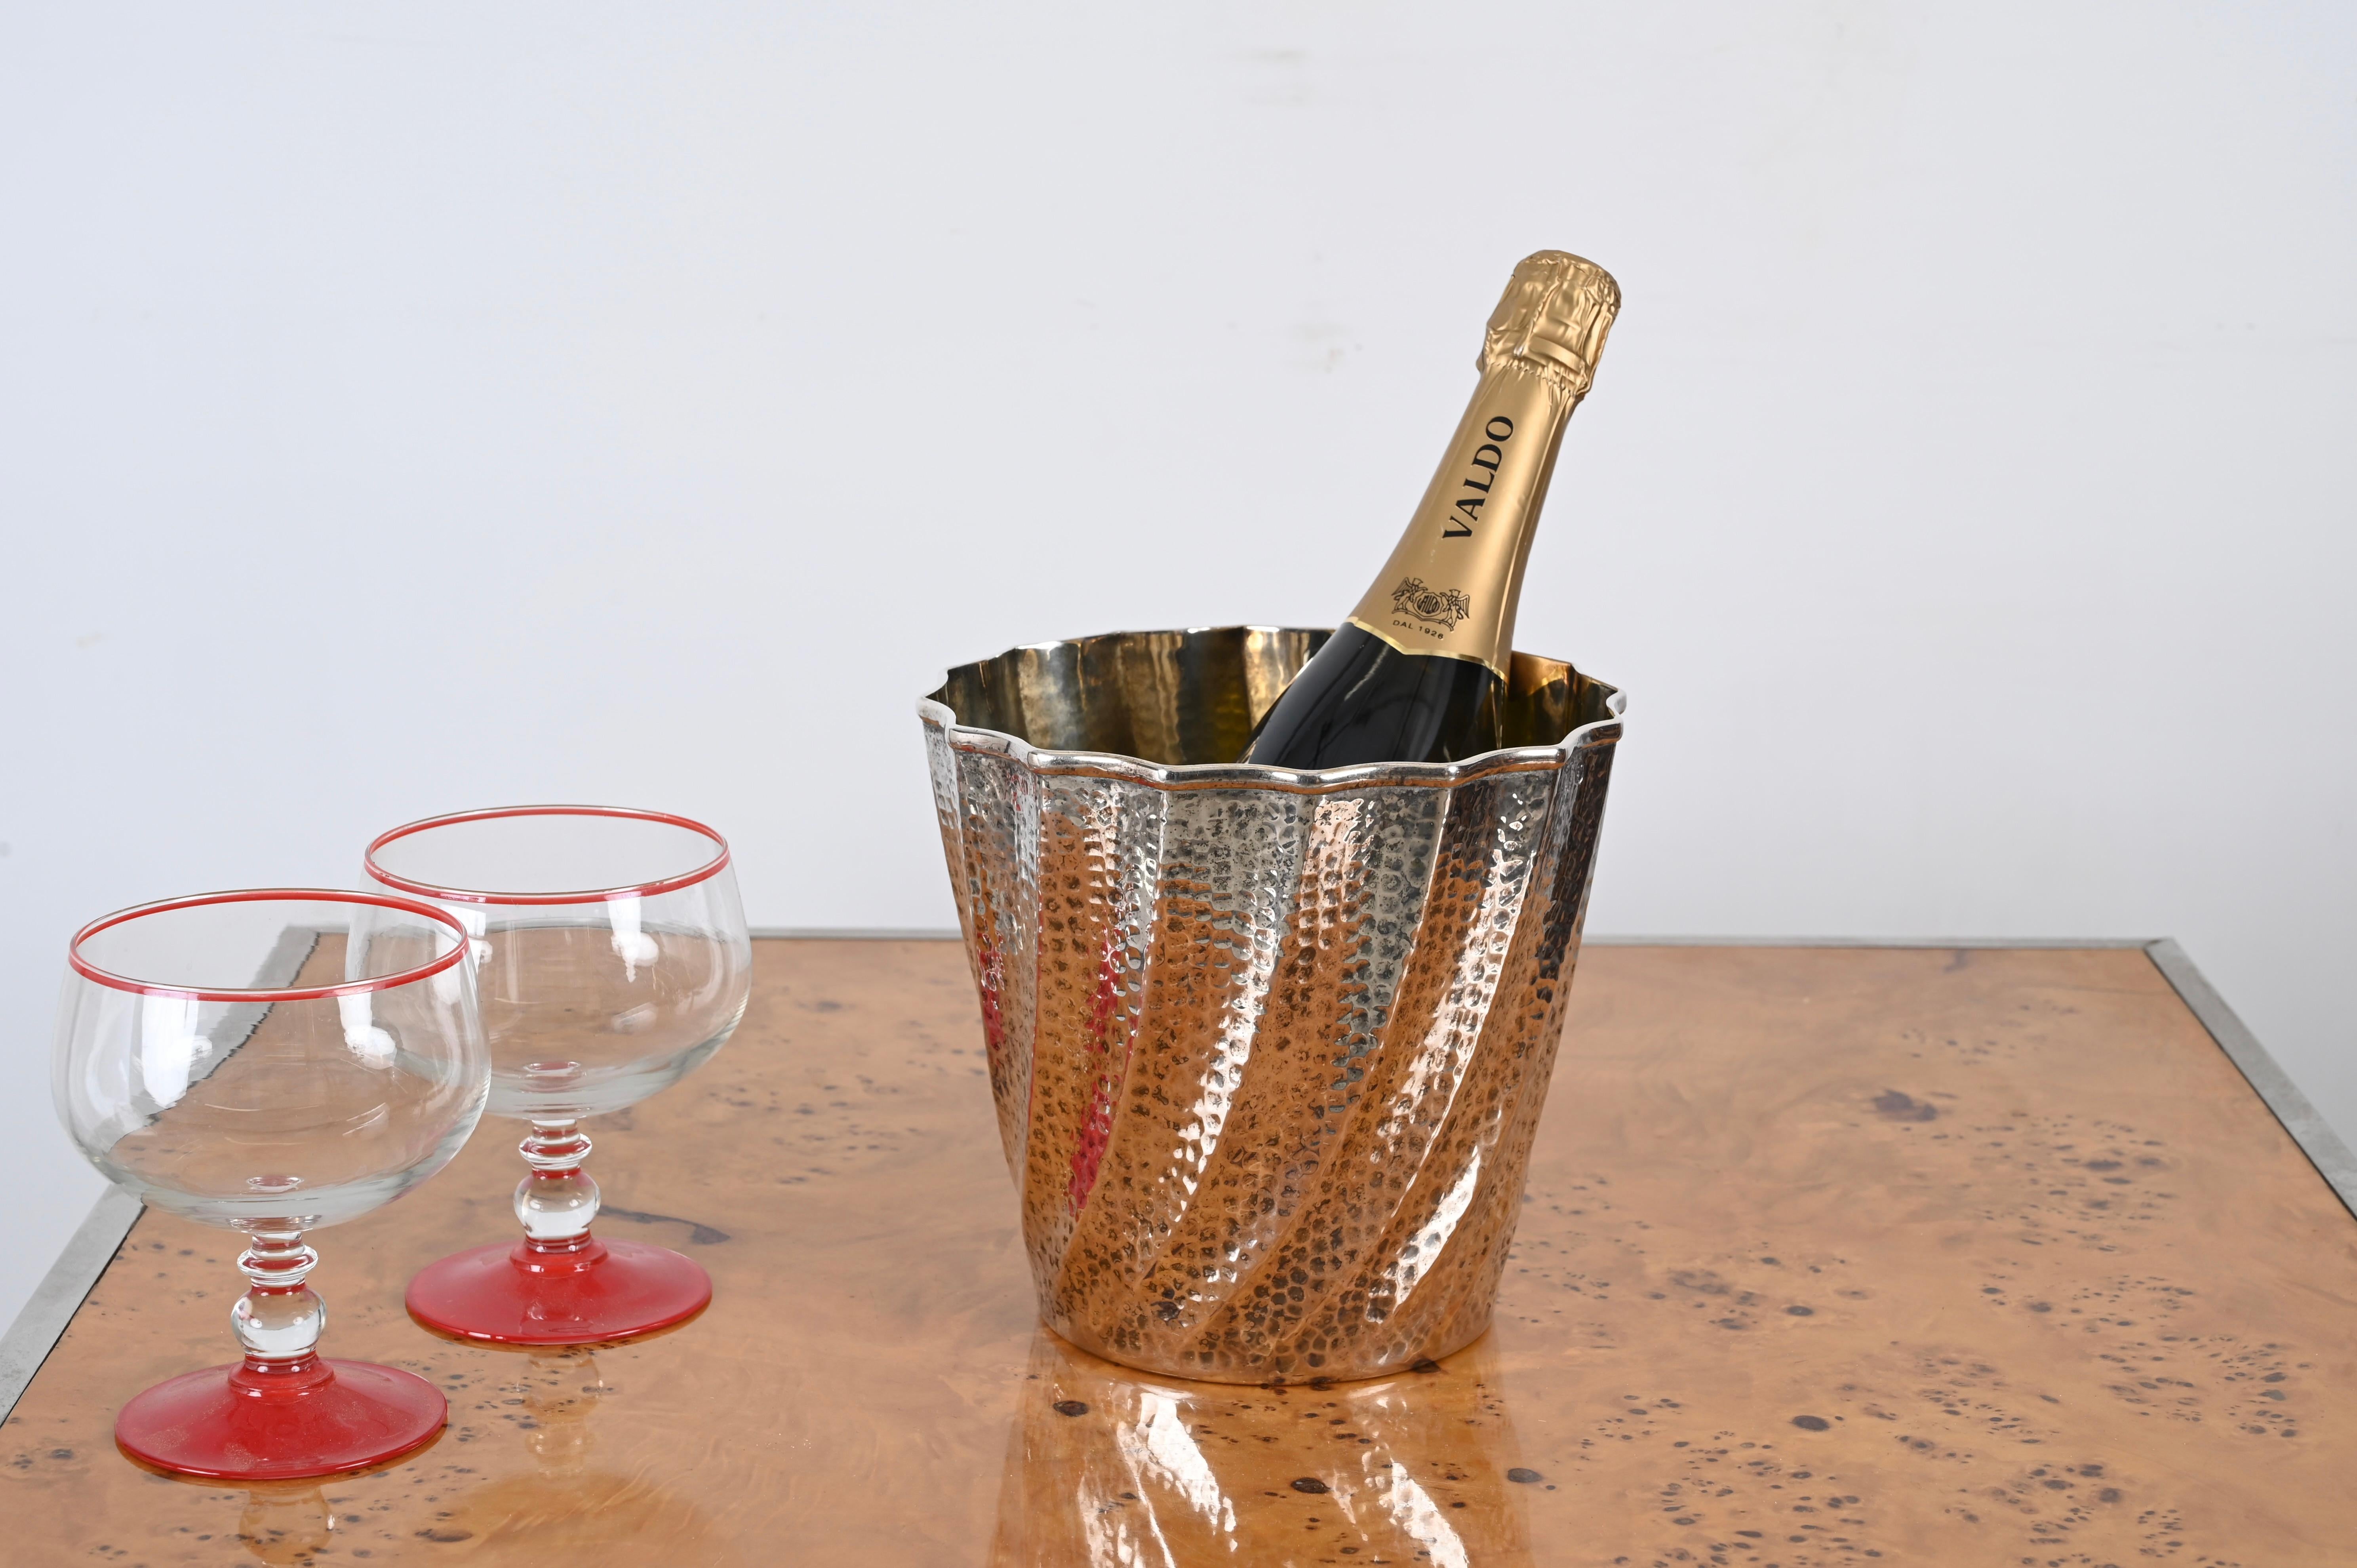 Gorgeous Mid-Century vermeil ice bucket in hammered metal which is silver-plated outside and goldplated inside. This fantastic piece was produced by Calegaro in Italy in the 1970s. 

This incredibly elegant ice bucket features a curved multifaceted